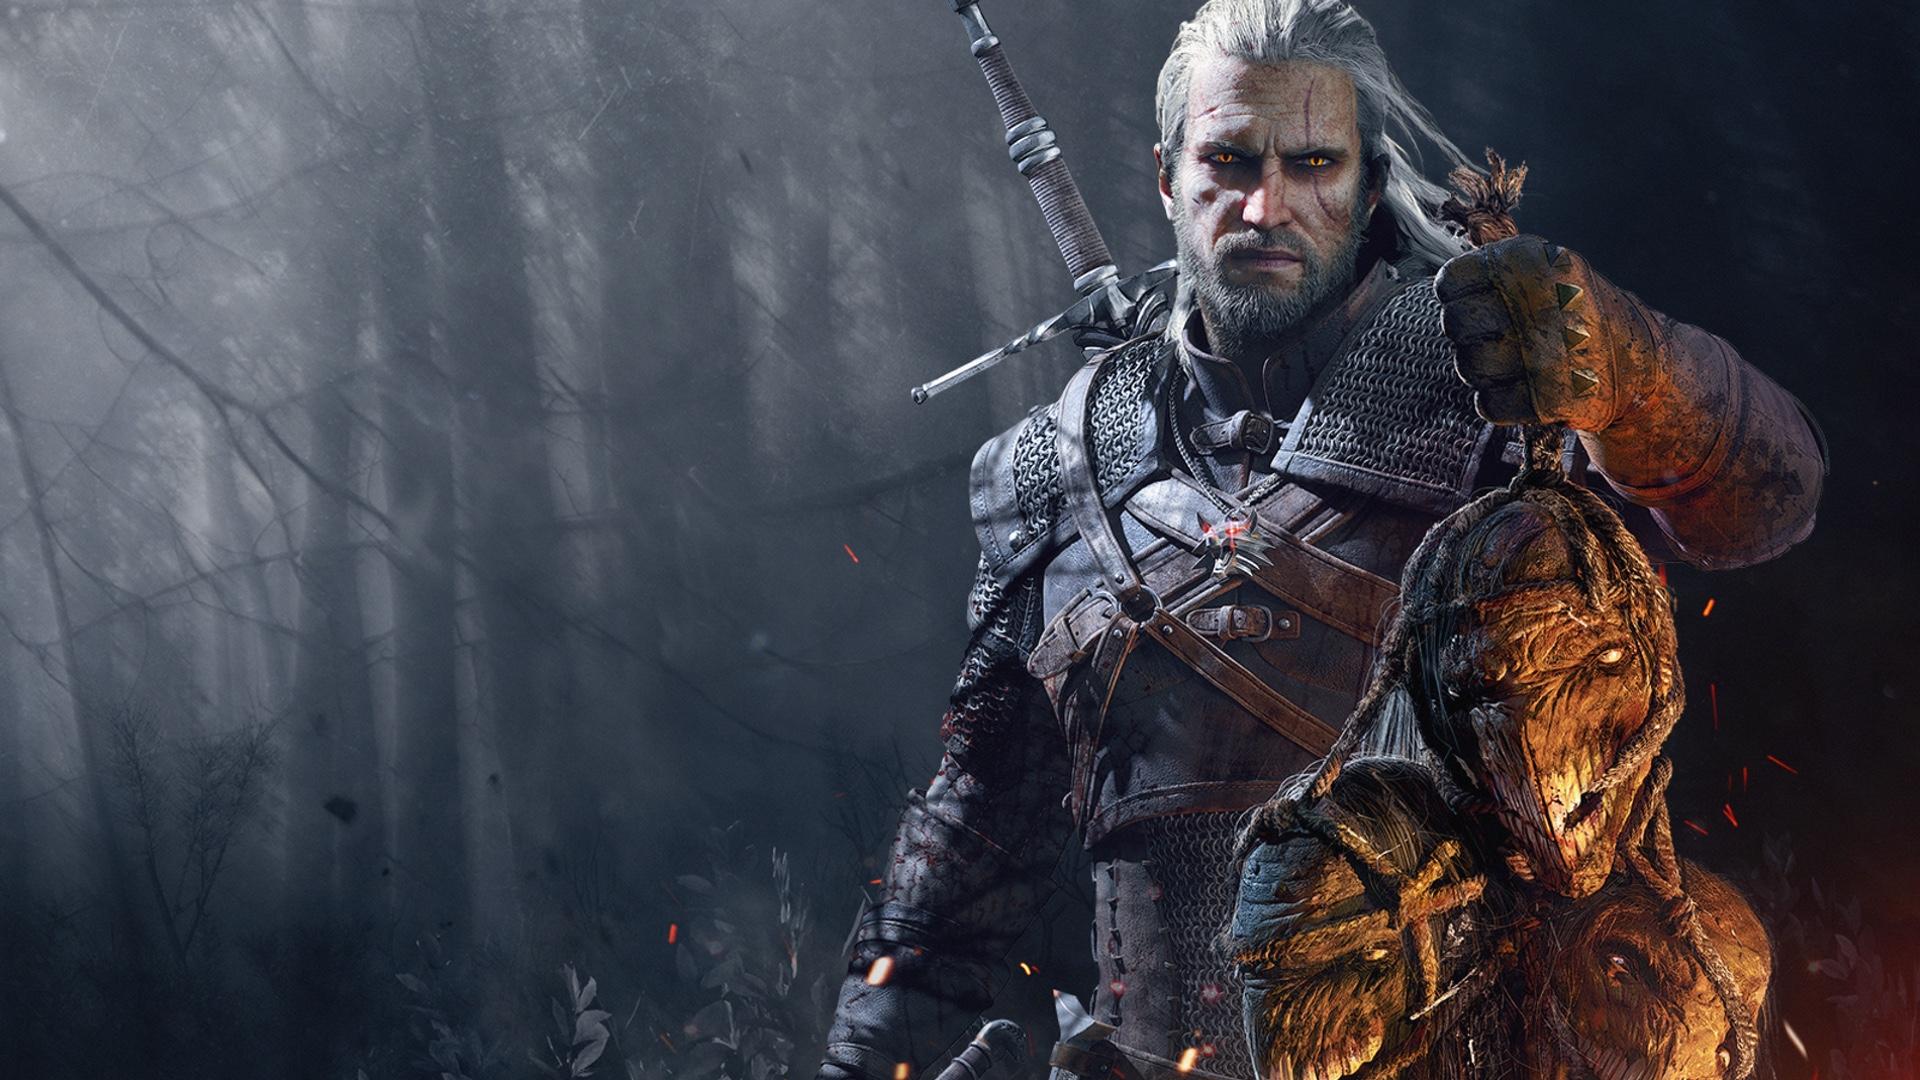 More Casting News For Netflix's THE WITCHER Series